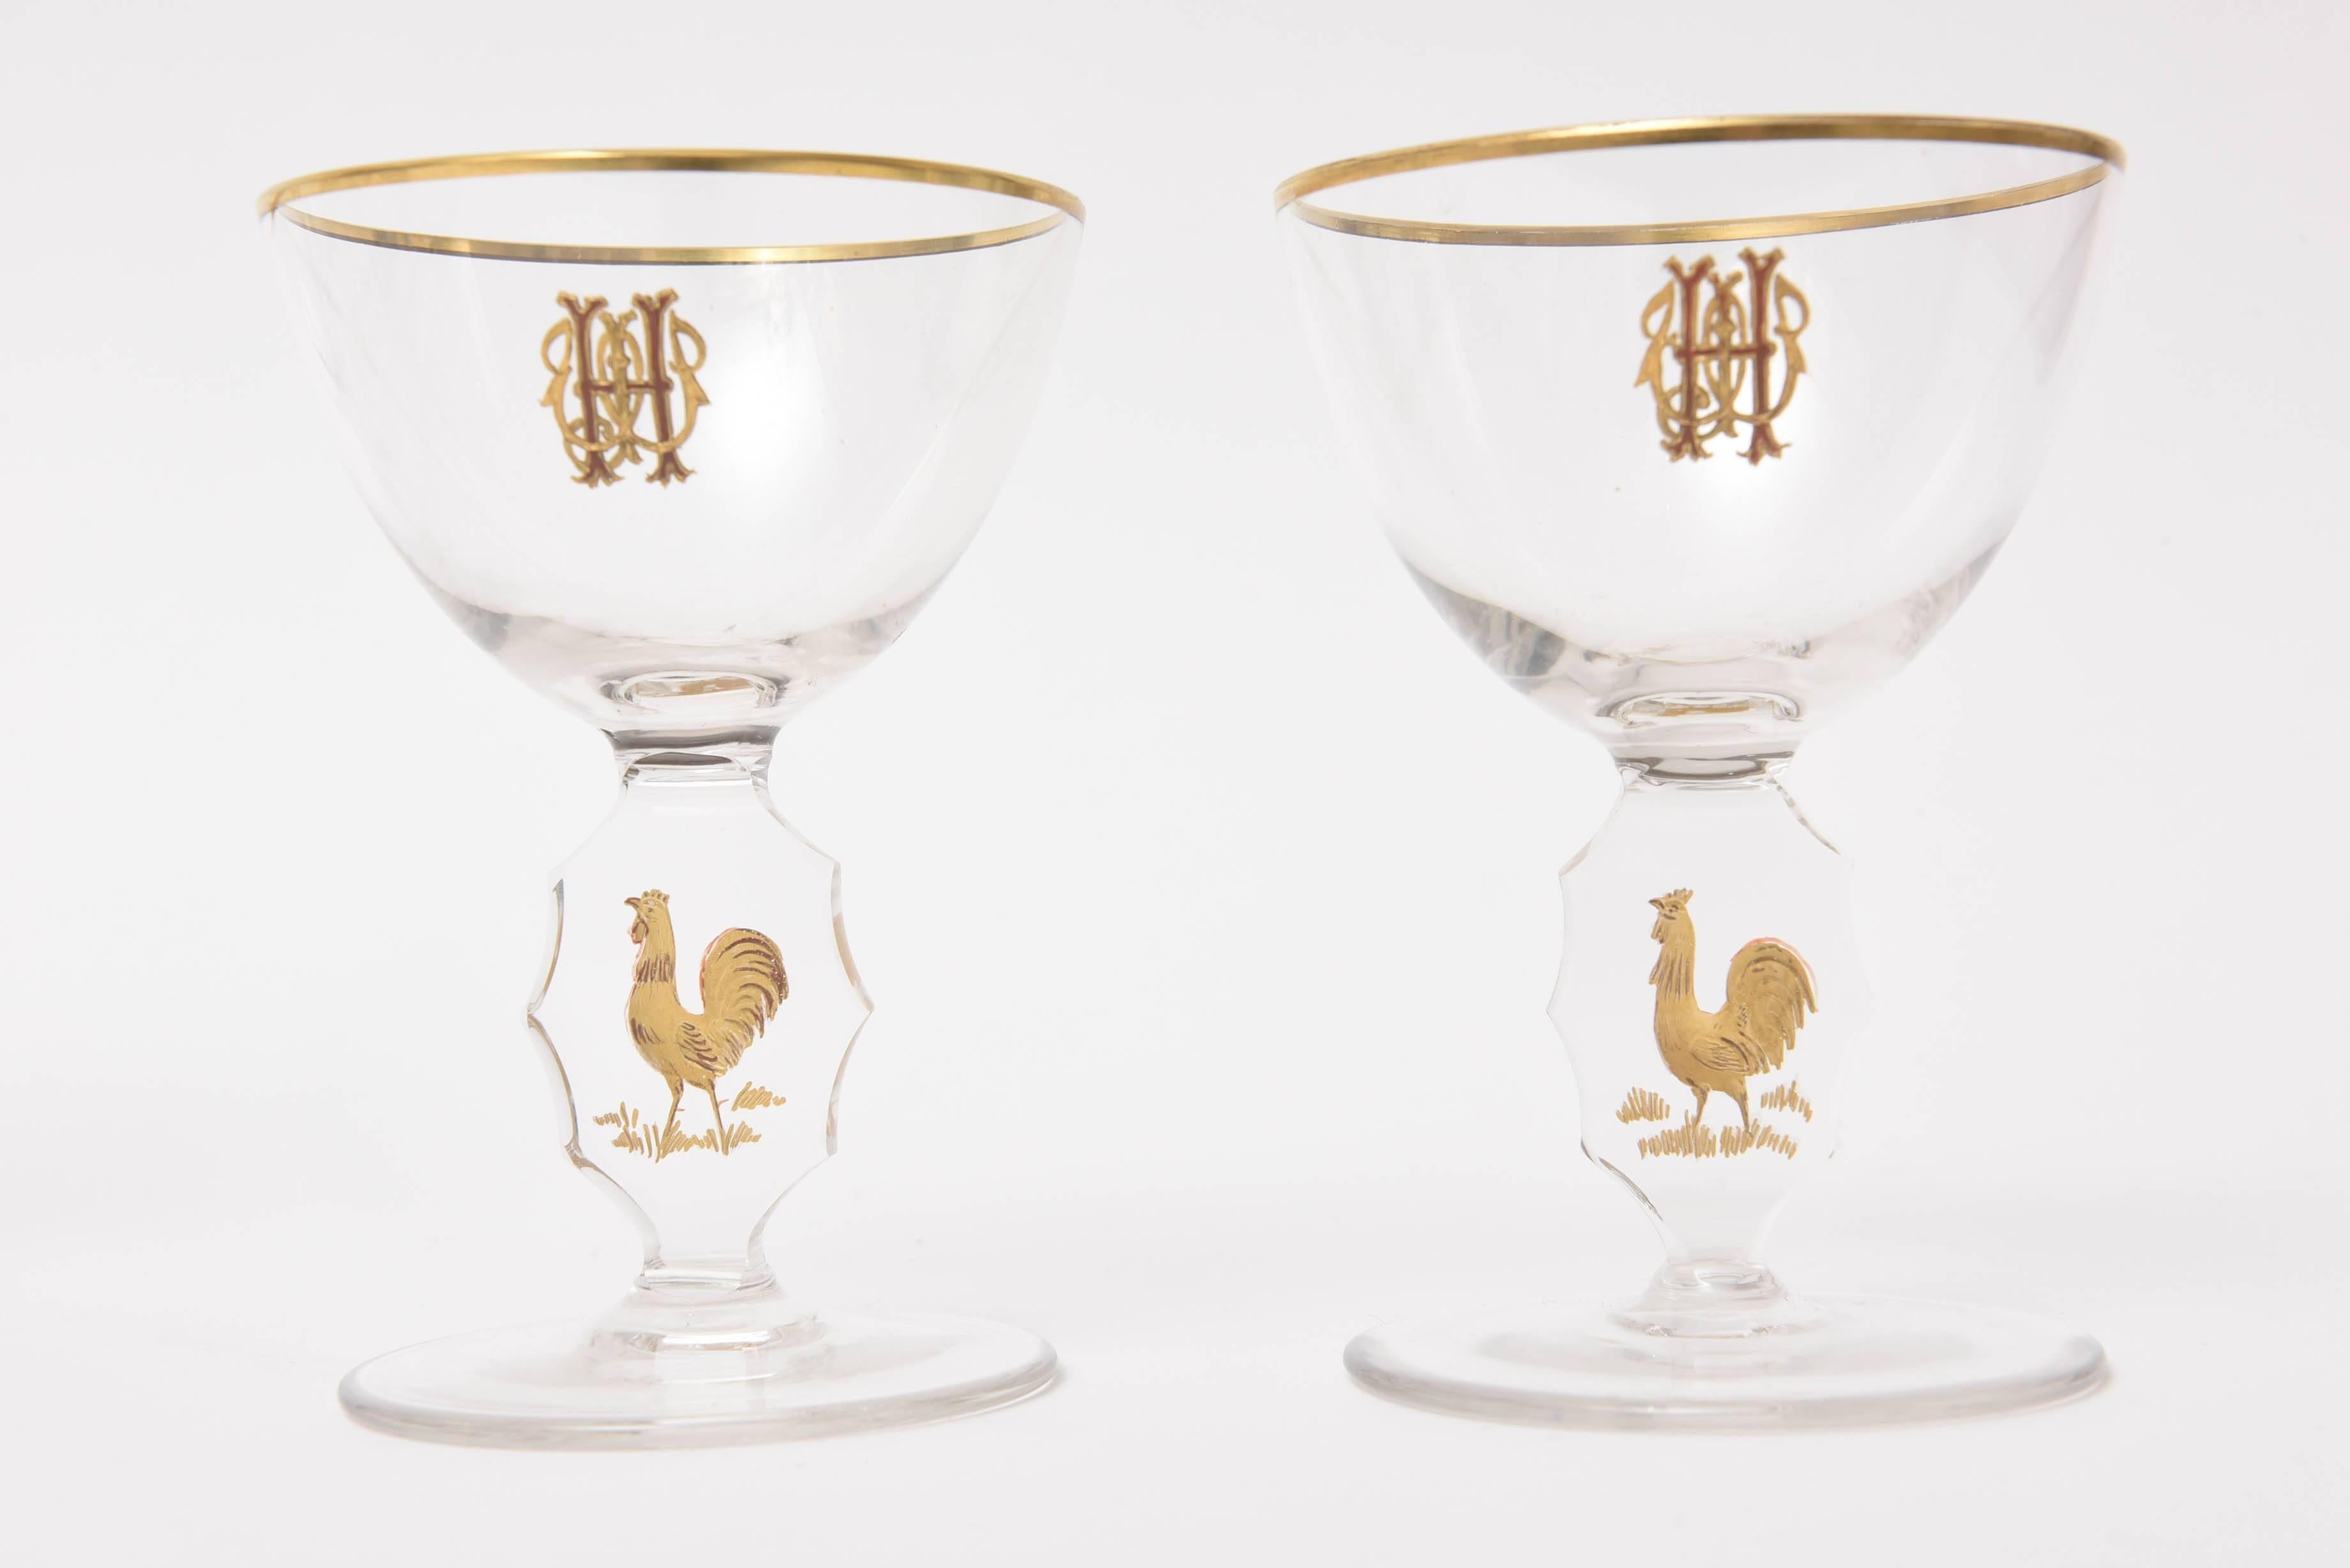 Set of 15 Cocktail Glasses, Gilded Rooster with Cut Stem and Raised Monogram 1